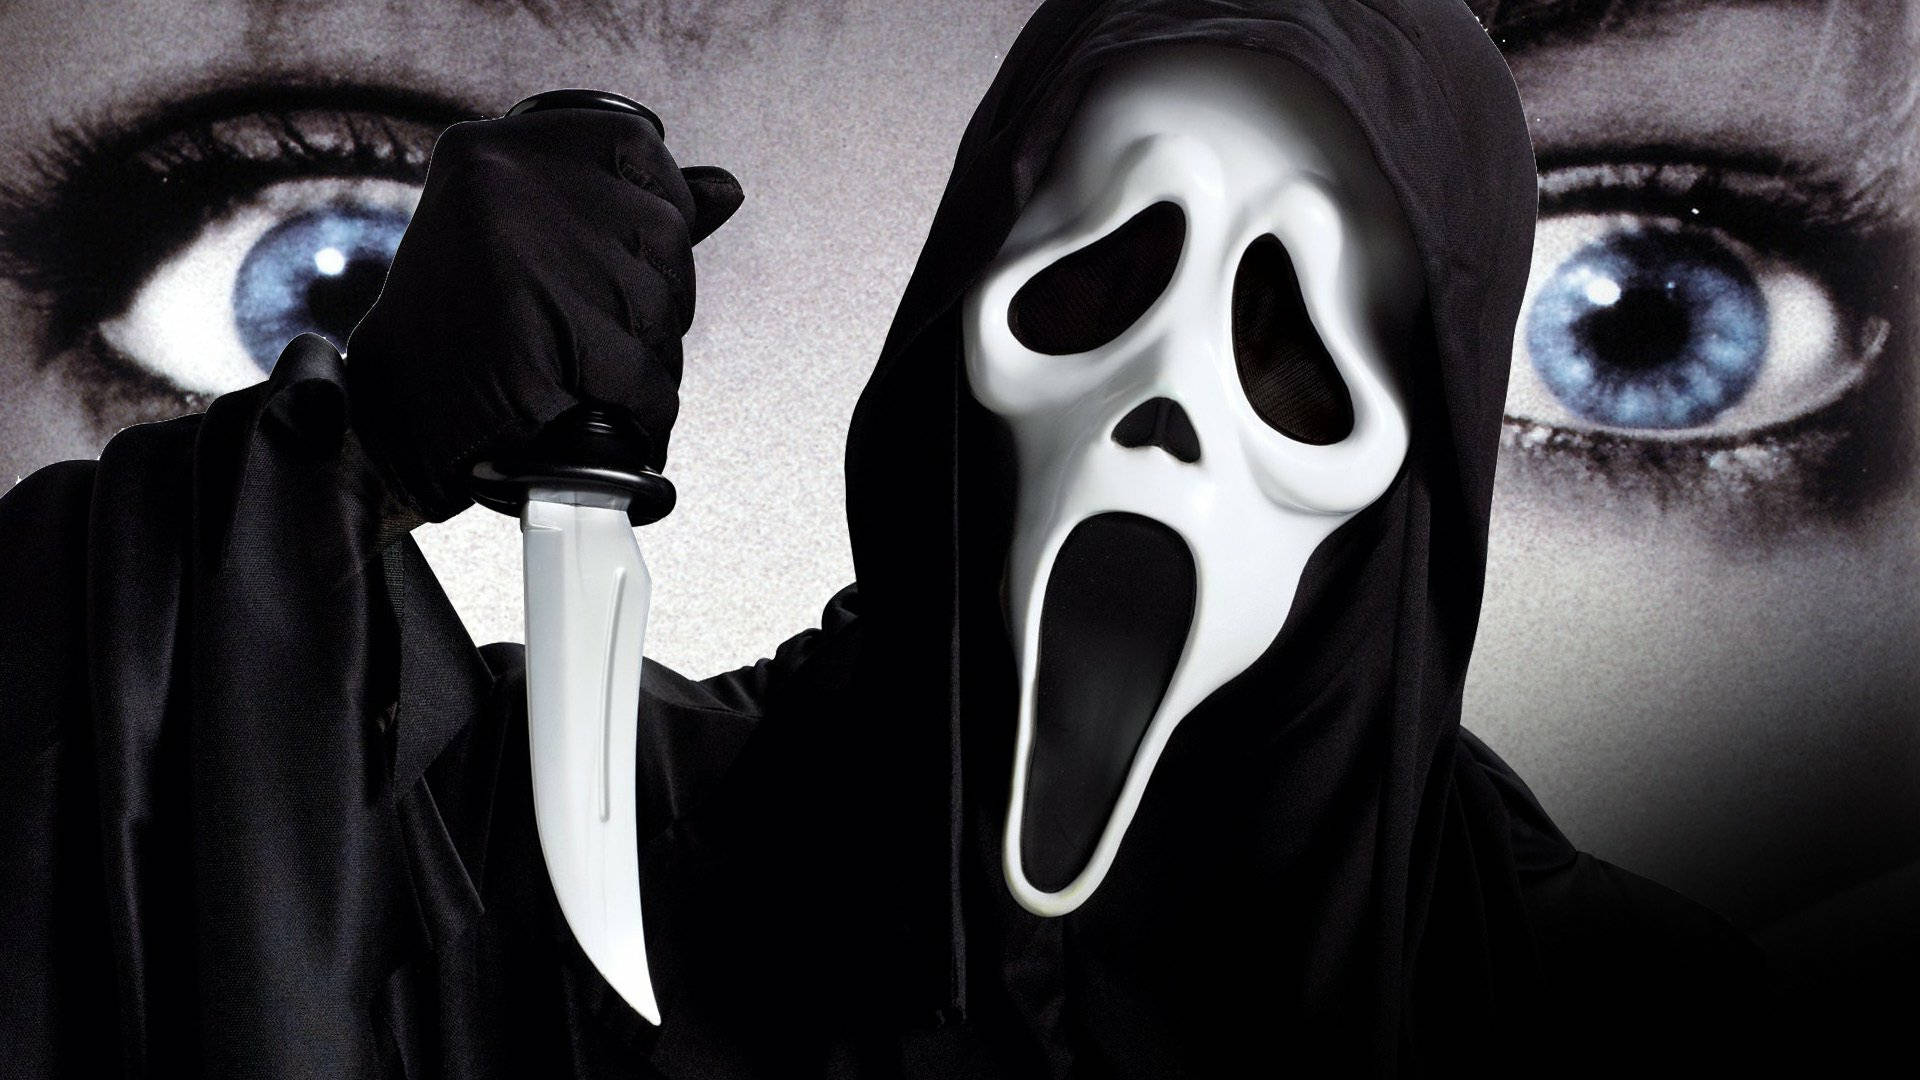 Ghostface 1920X1080 Wallpaper and Background Image